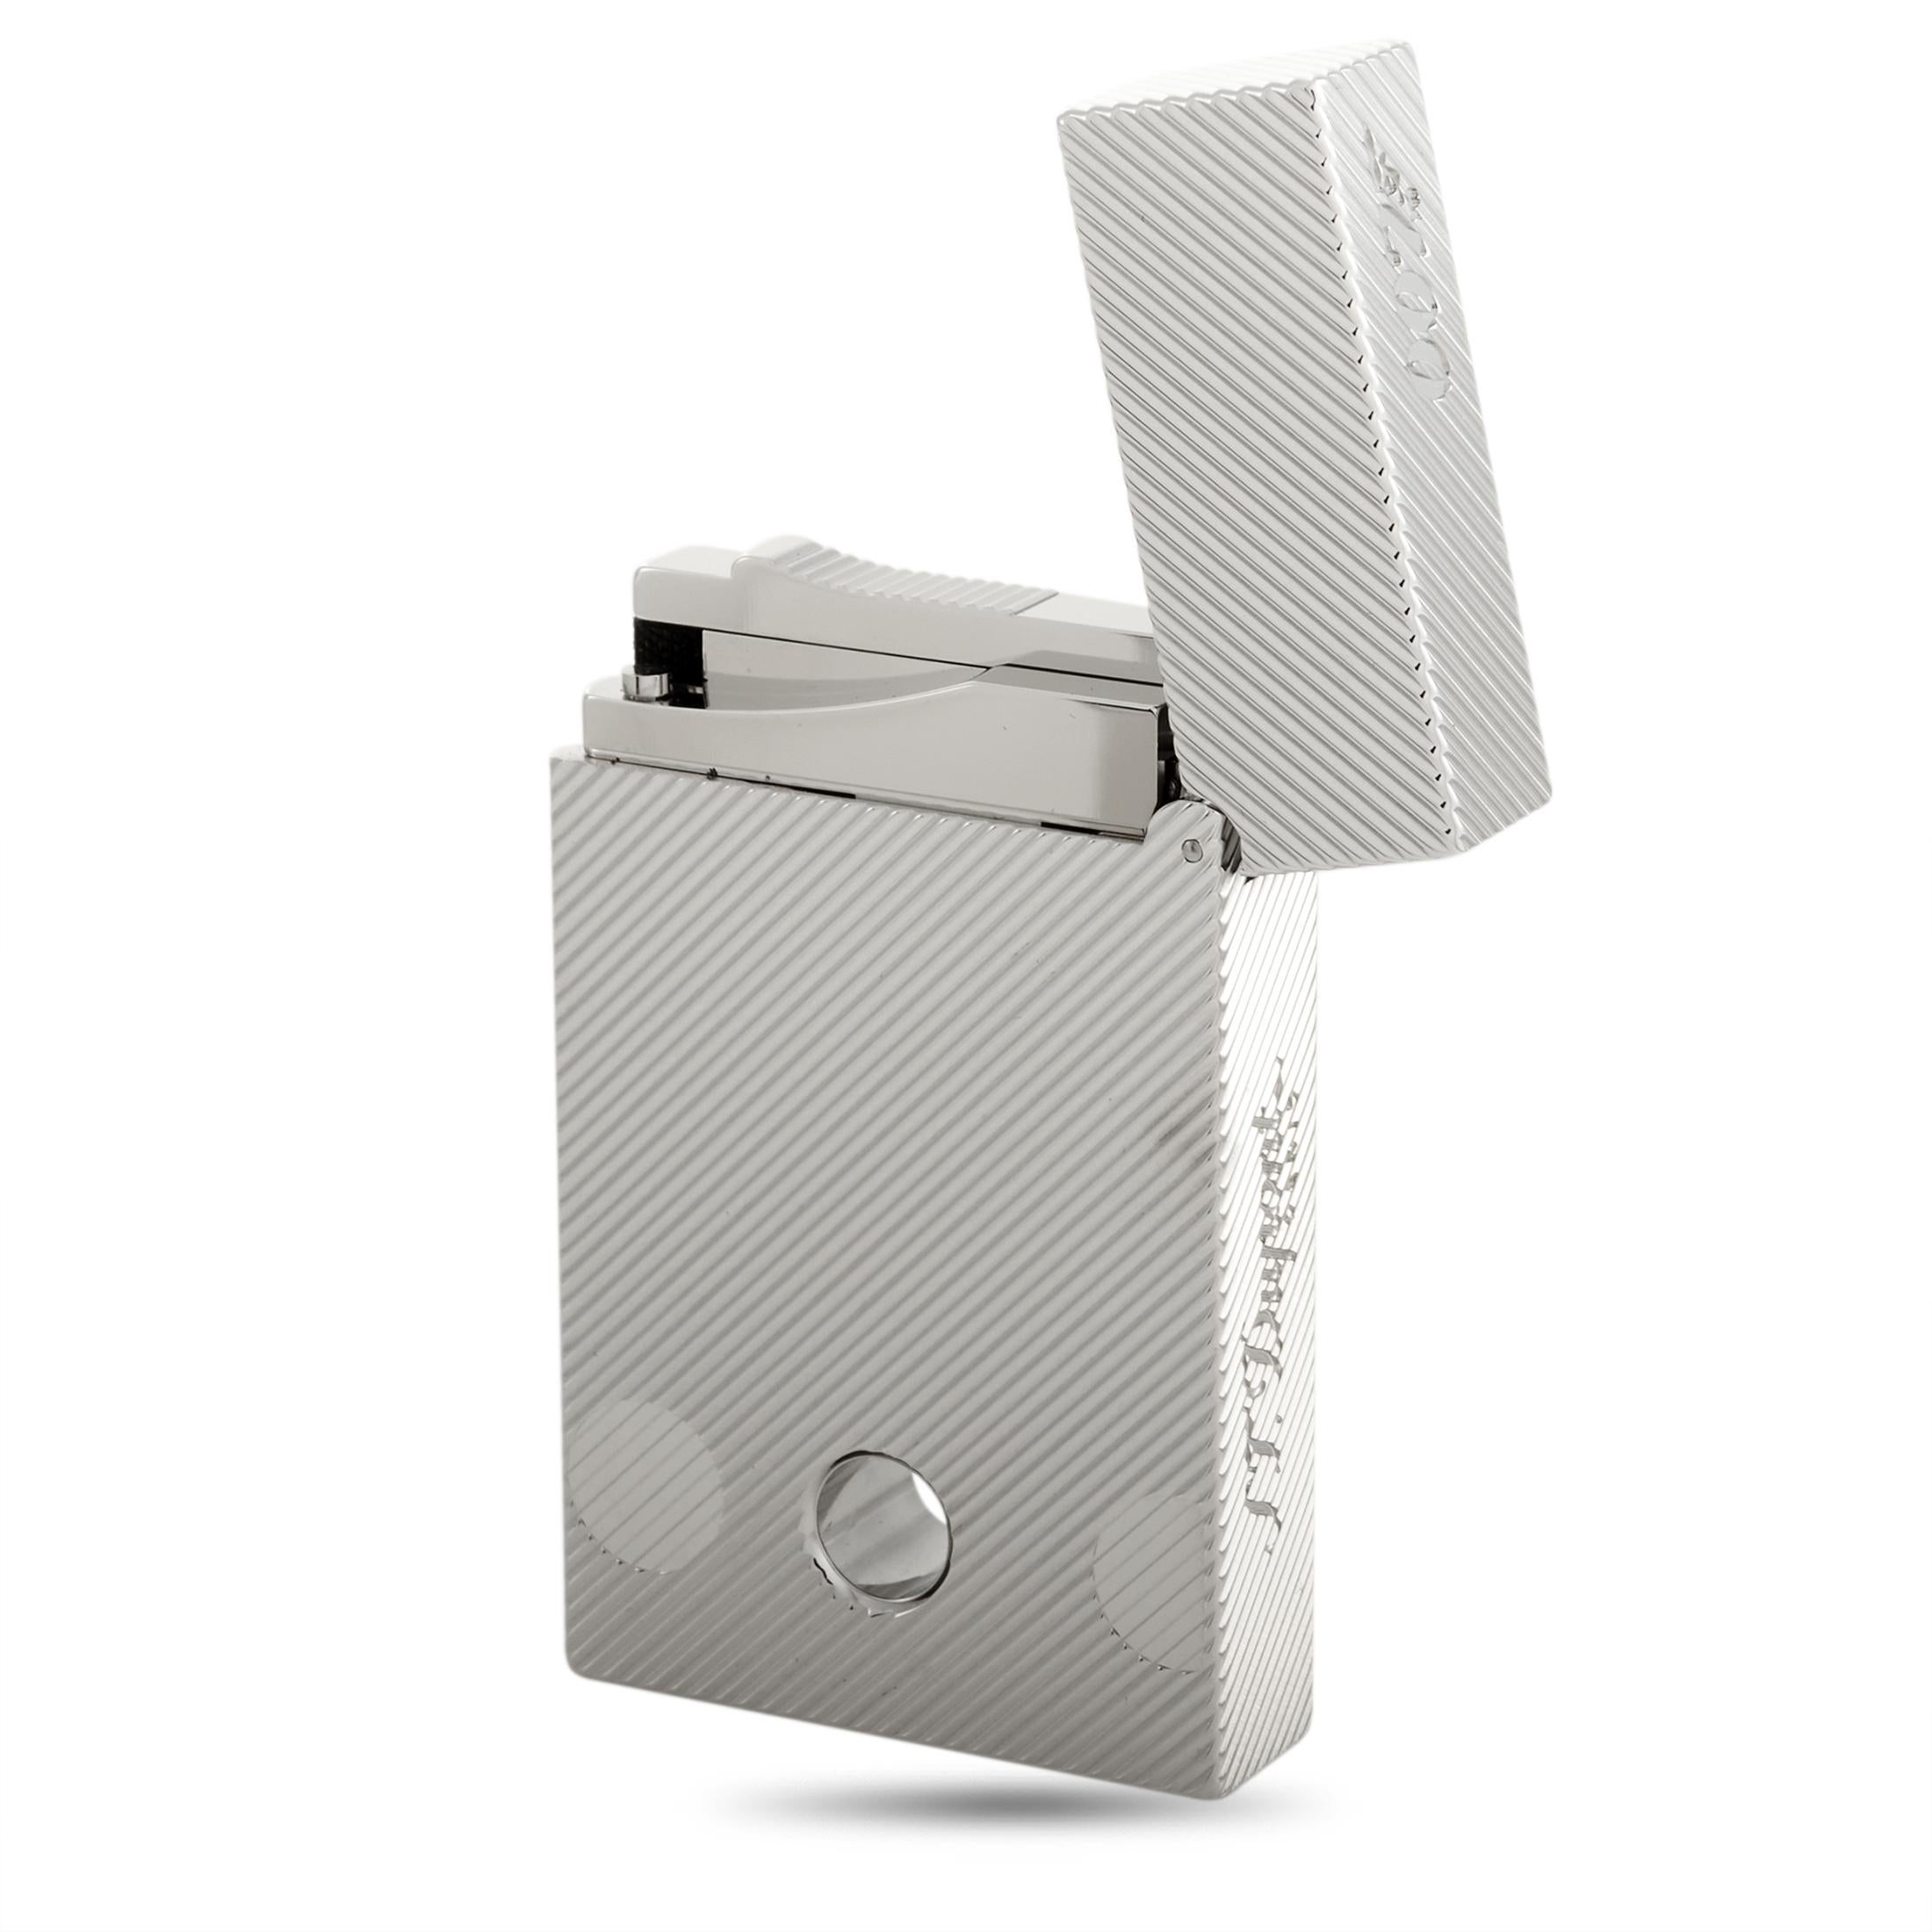 This S.T. Dupont lighter from the “Ligne 2” collection is created as an homage to the iconic fictional British agent James Bond, and its design is based on the famous 007 logo. The lighter is made out of palladium and weighs 120 grams, measuring